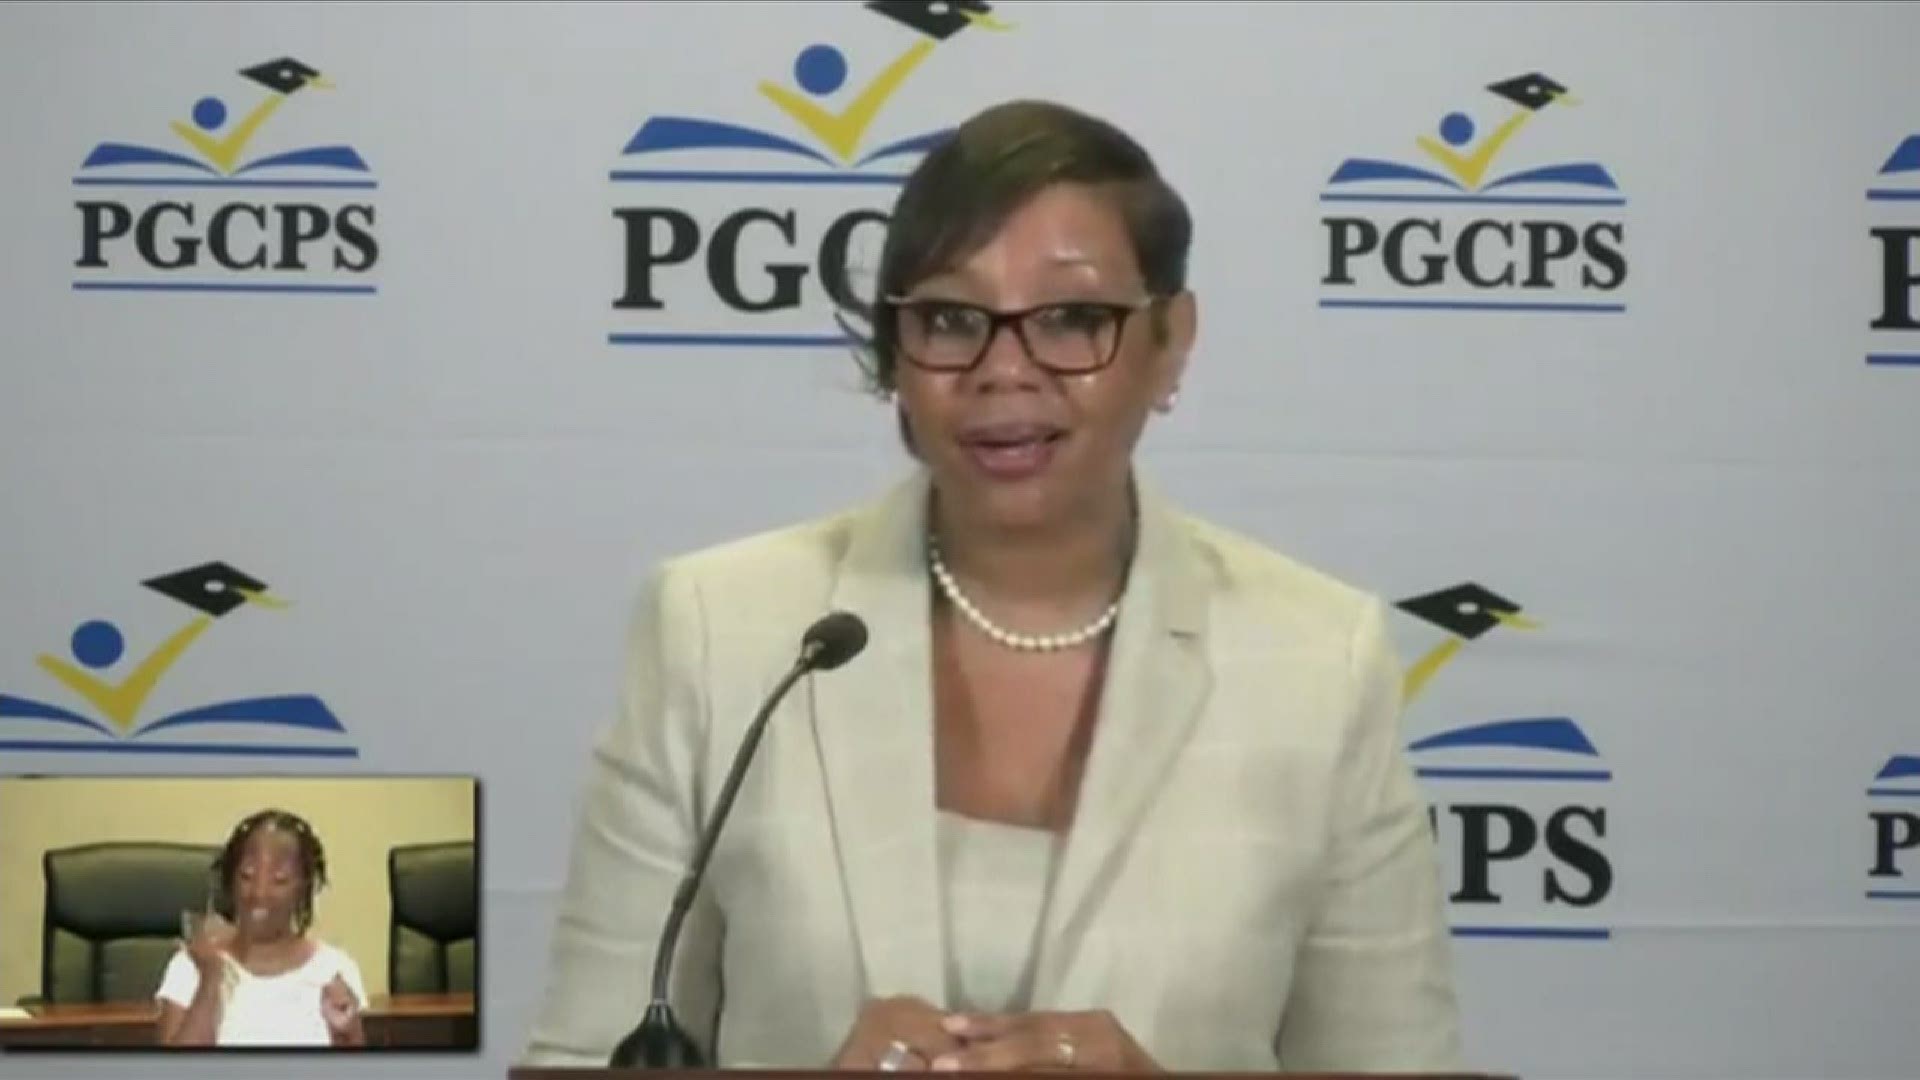 Prince George's County Schools Chief Executive Officer Dr. Monica Goldson announced that the school system will continue distance learning for the 2020-2021 academic